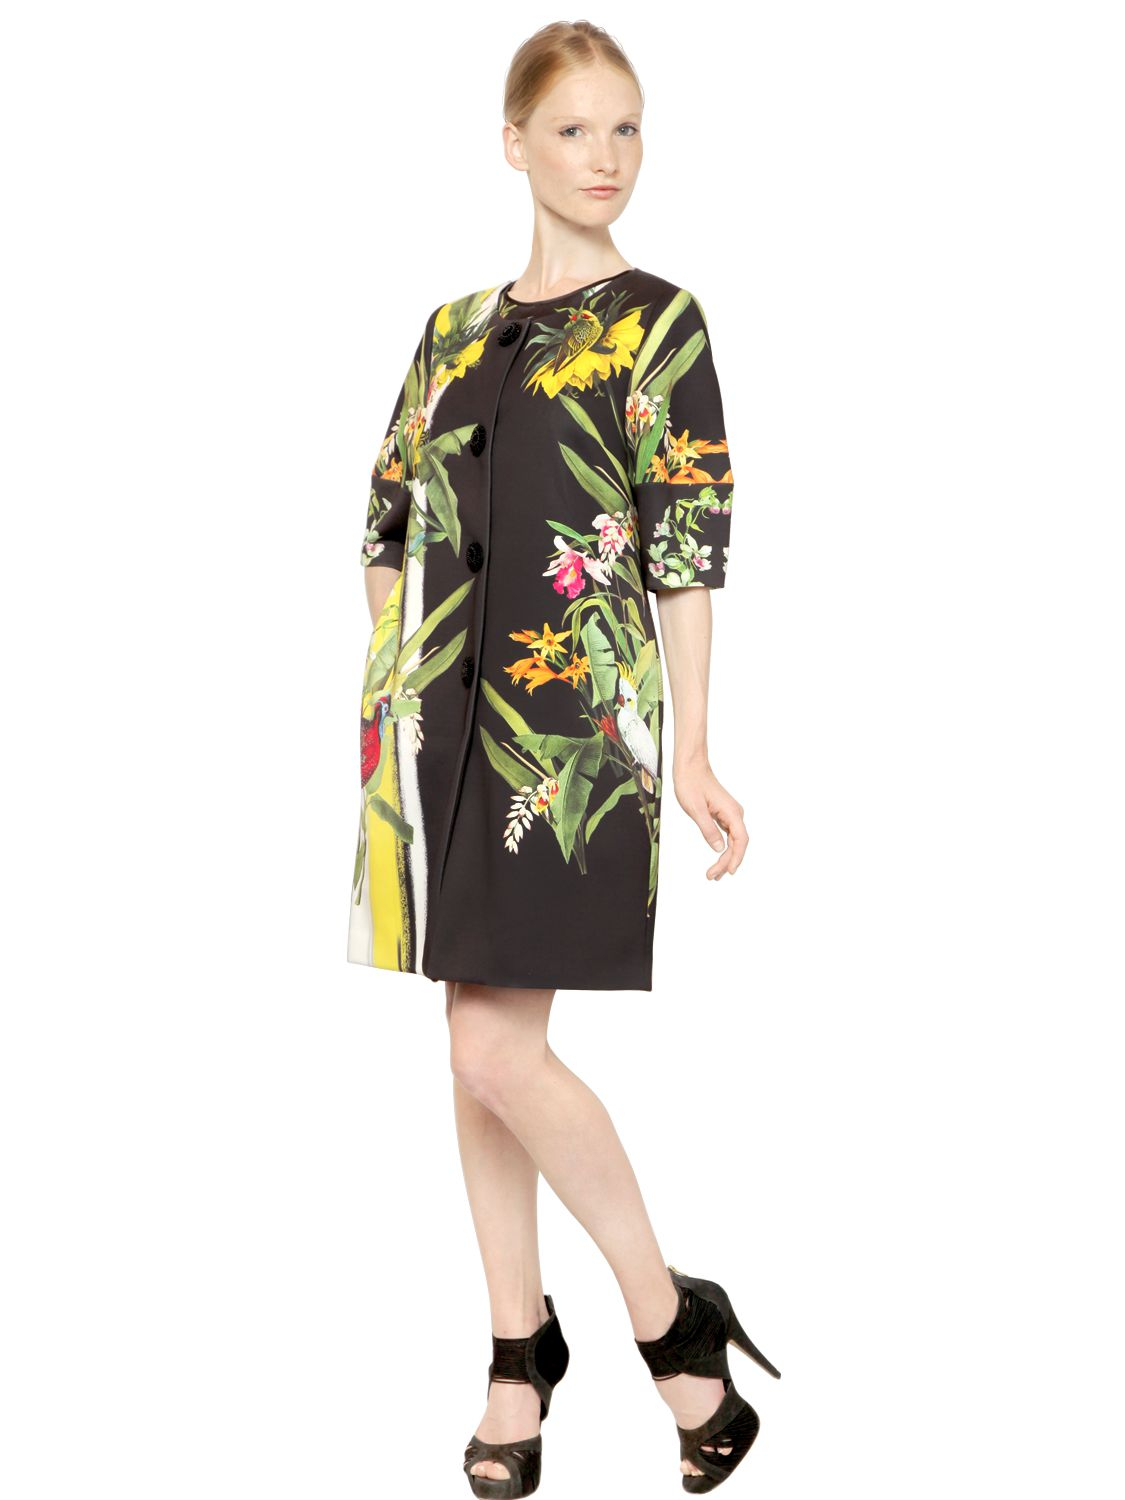 Lyst - Gaowei+xinzhan Floral Print Short Sleeved Coat